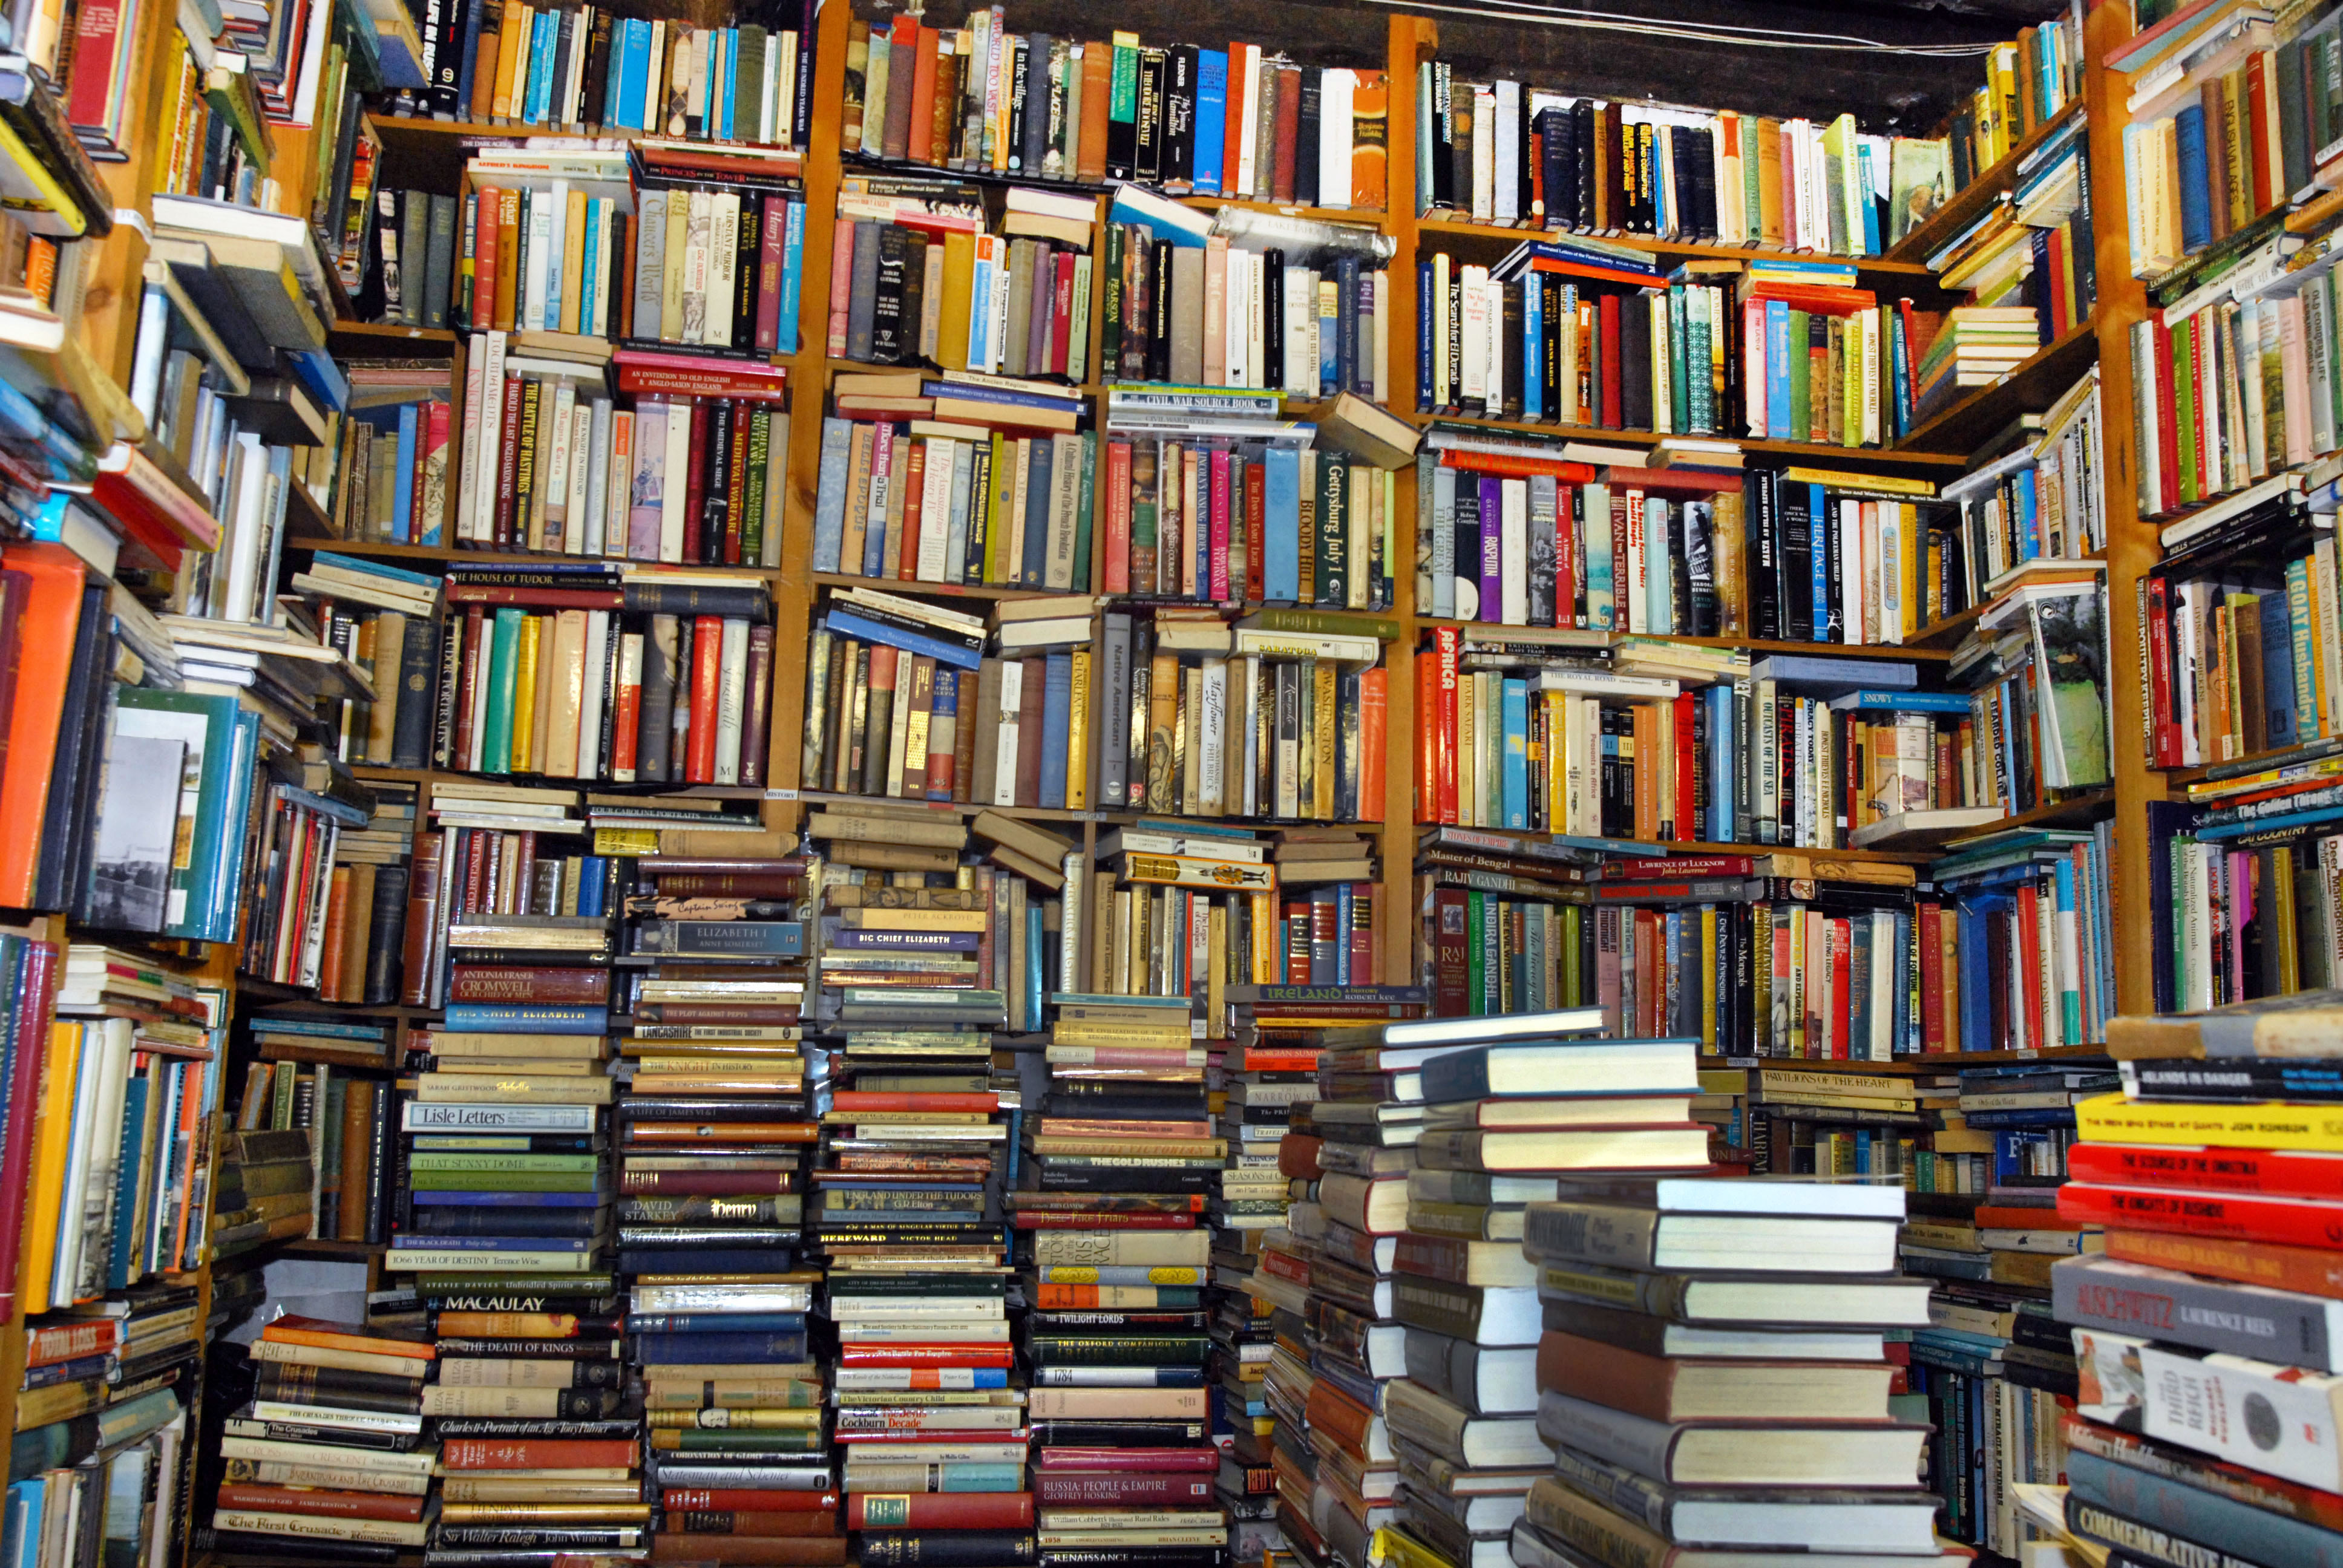 100 books to read before you die, according to Amazon publishers